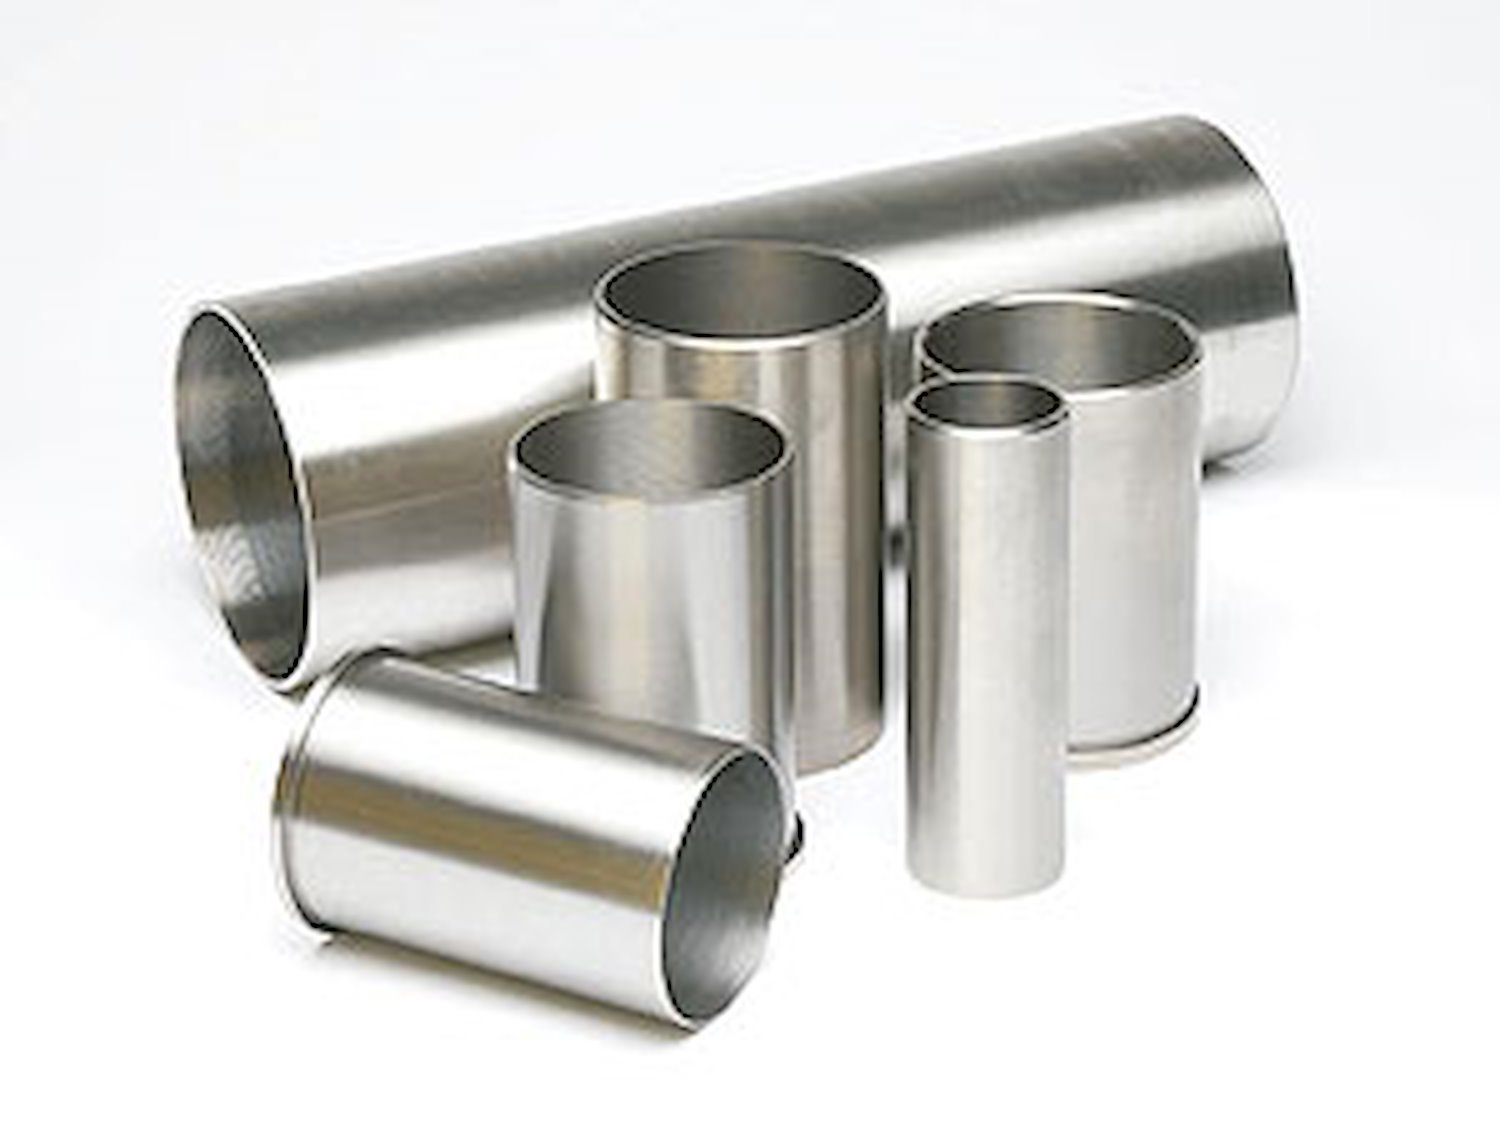 Cylinder Sleeve Bore: 2.8350" Length: 6-1/2" Wall Thickness: 1/8"